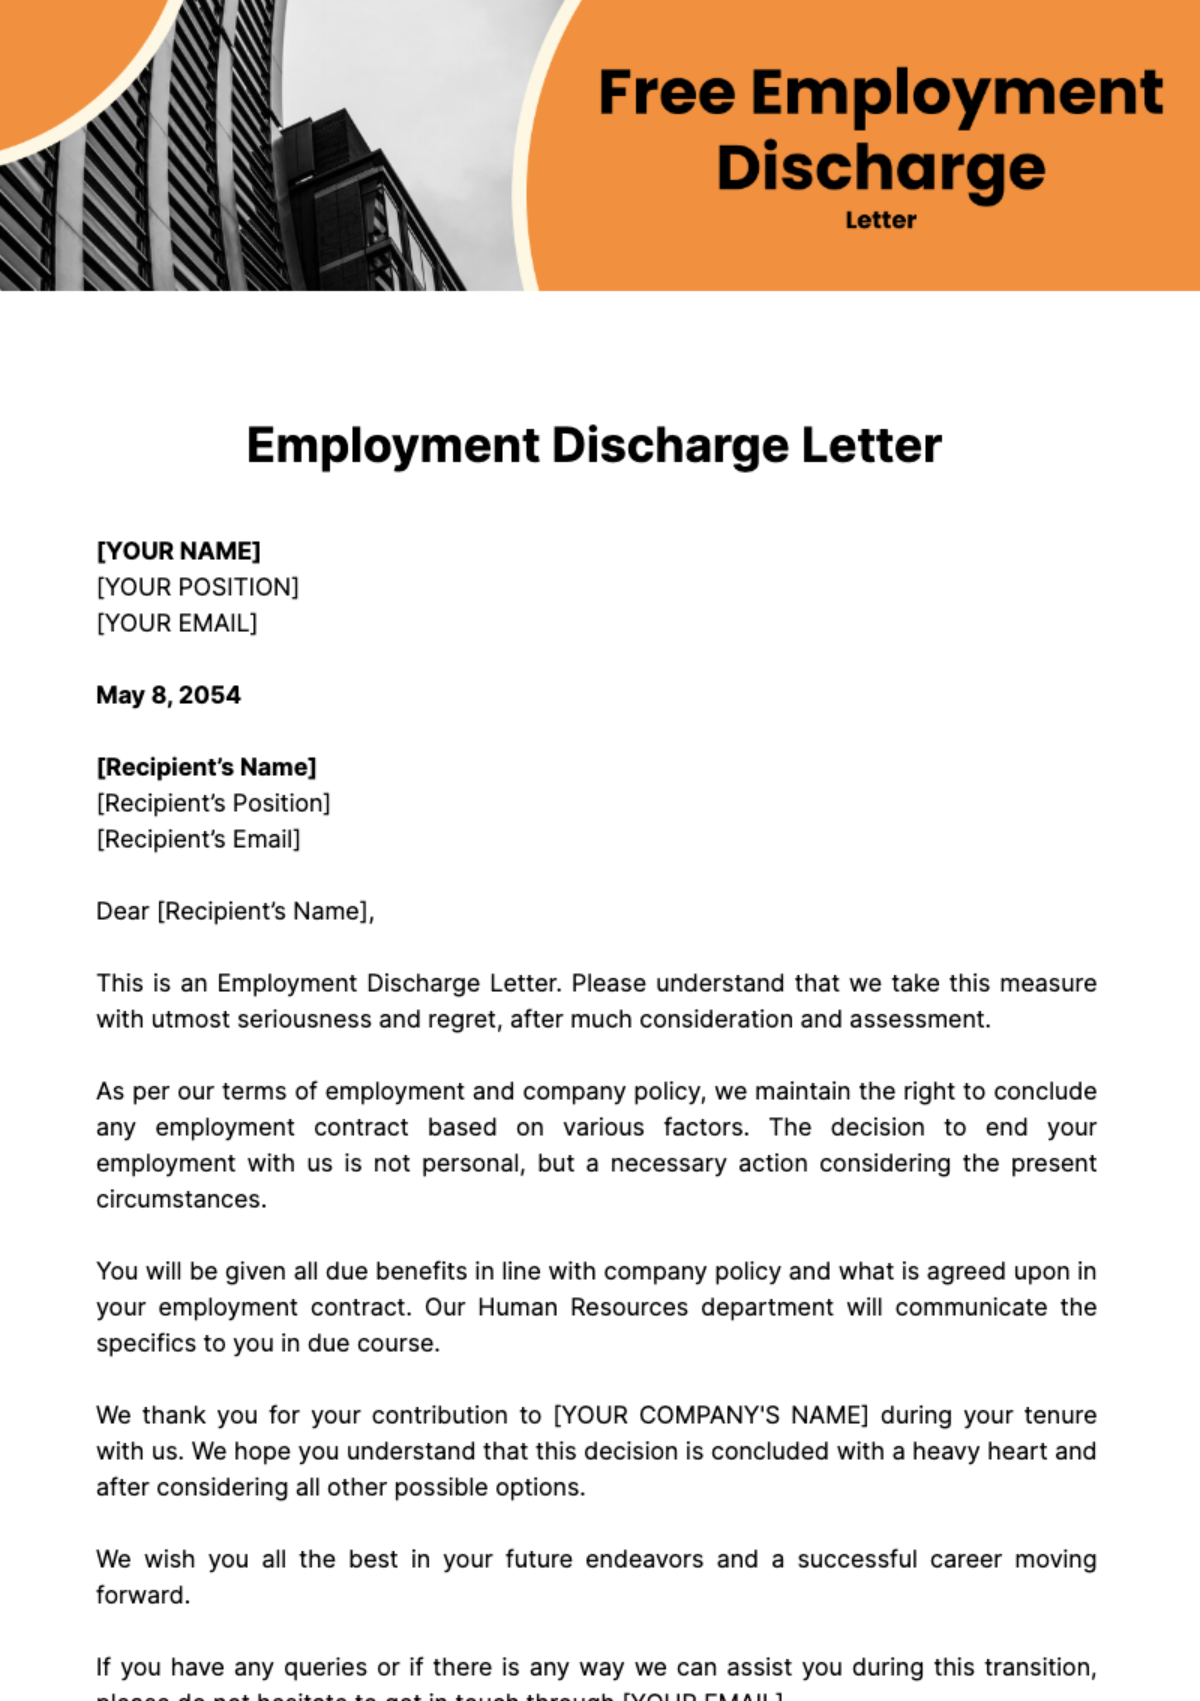 Free Employment Discharge Letter Template